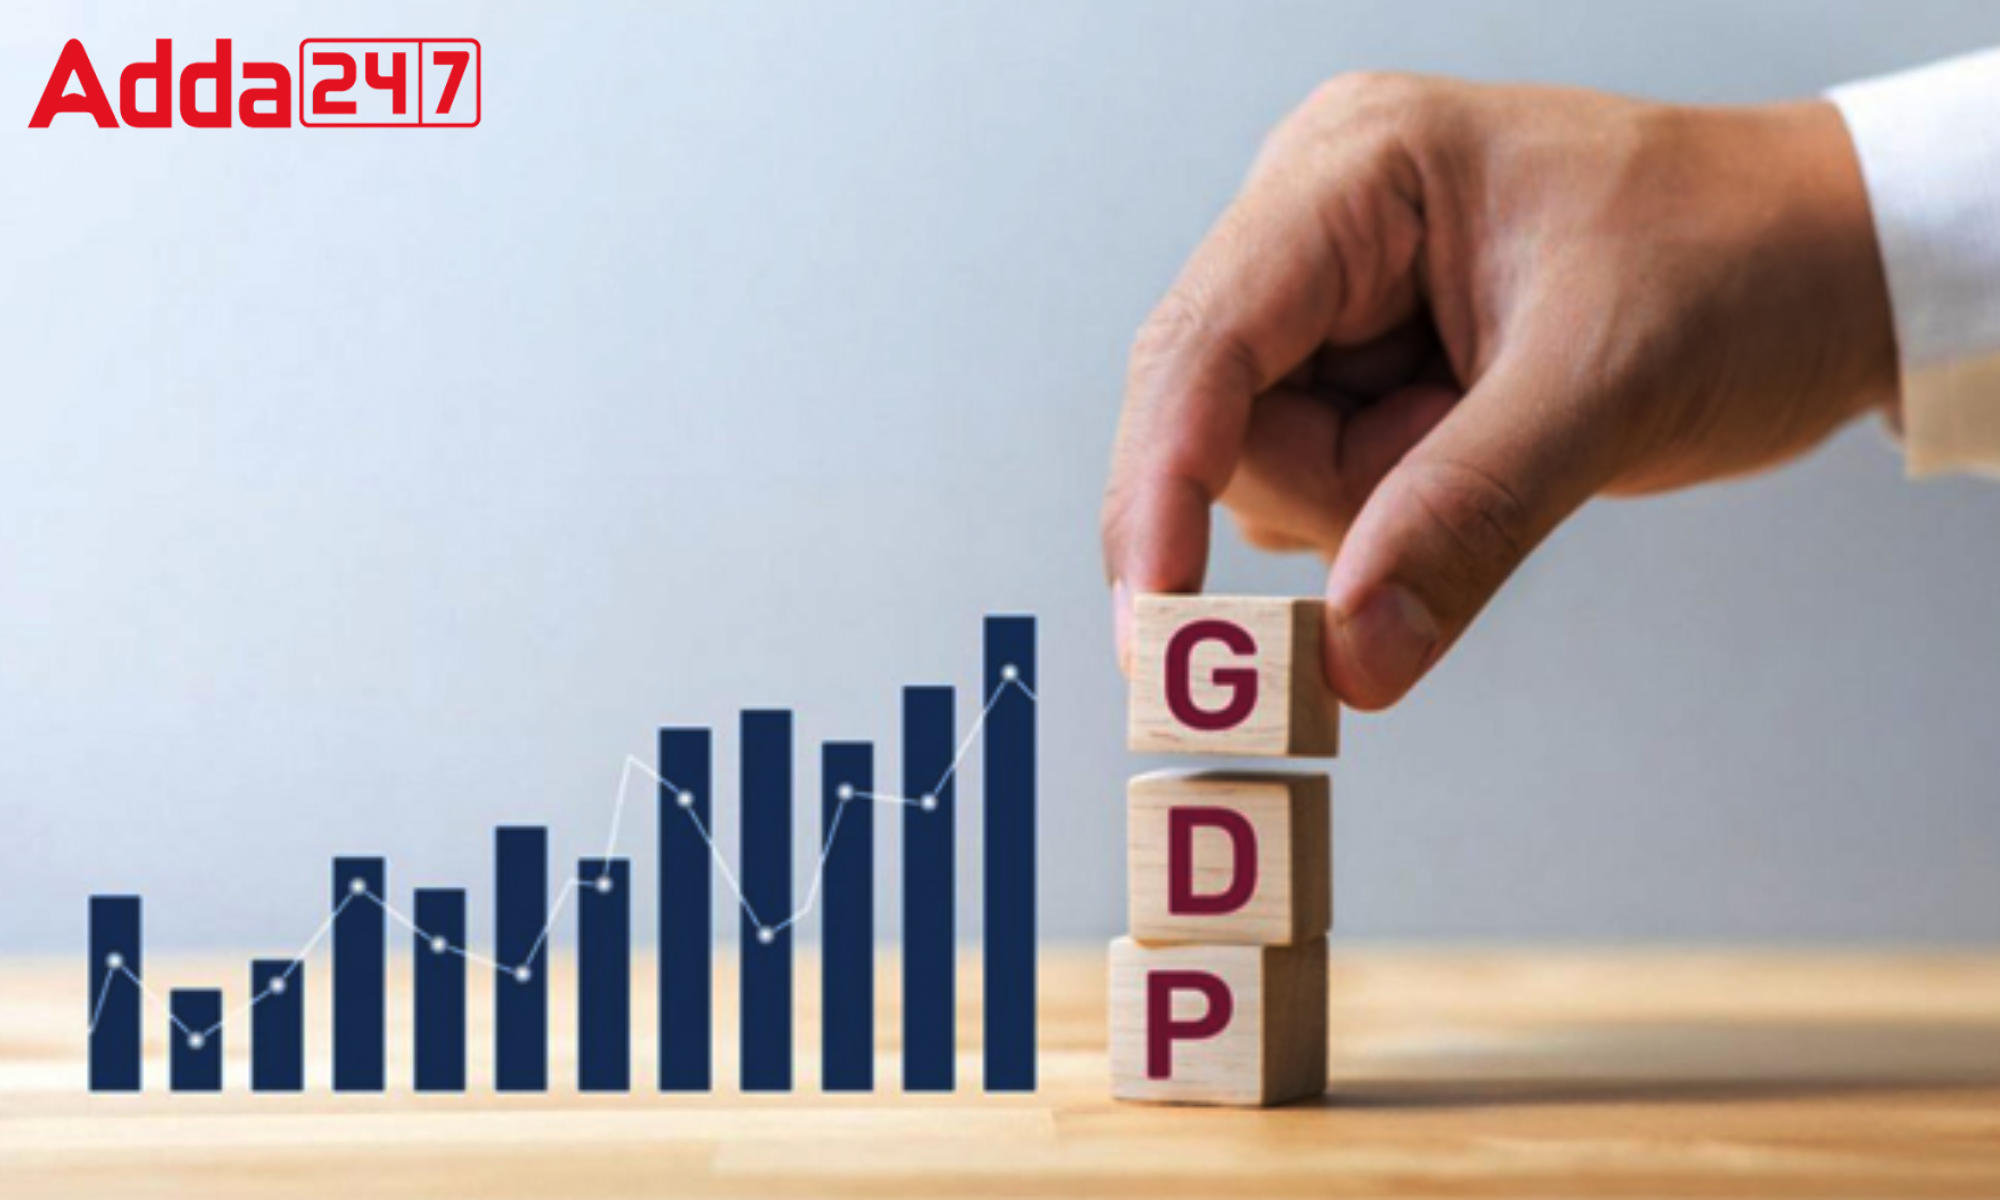 India's 2022 GDP growth prediction reduced by Goldman Sachs from 7.6% to 7%_50.1